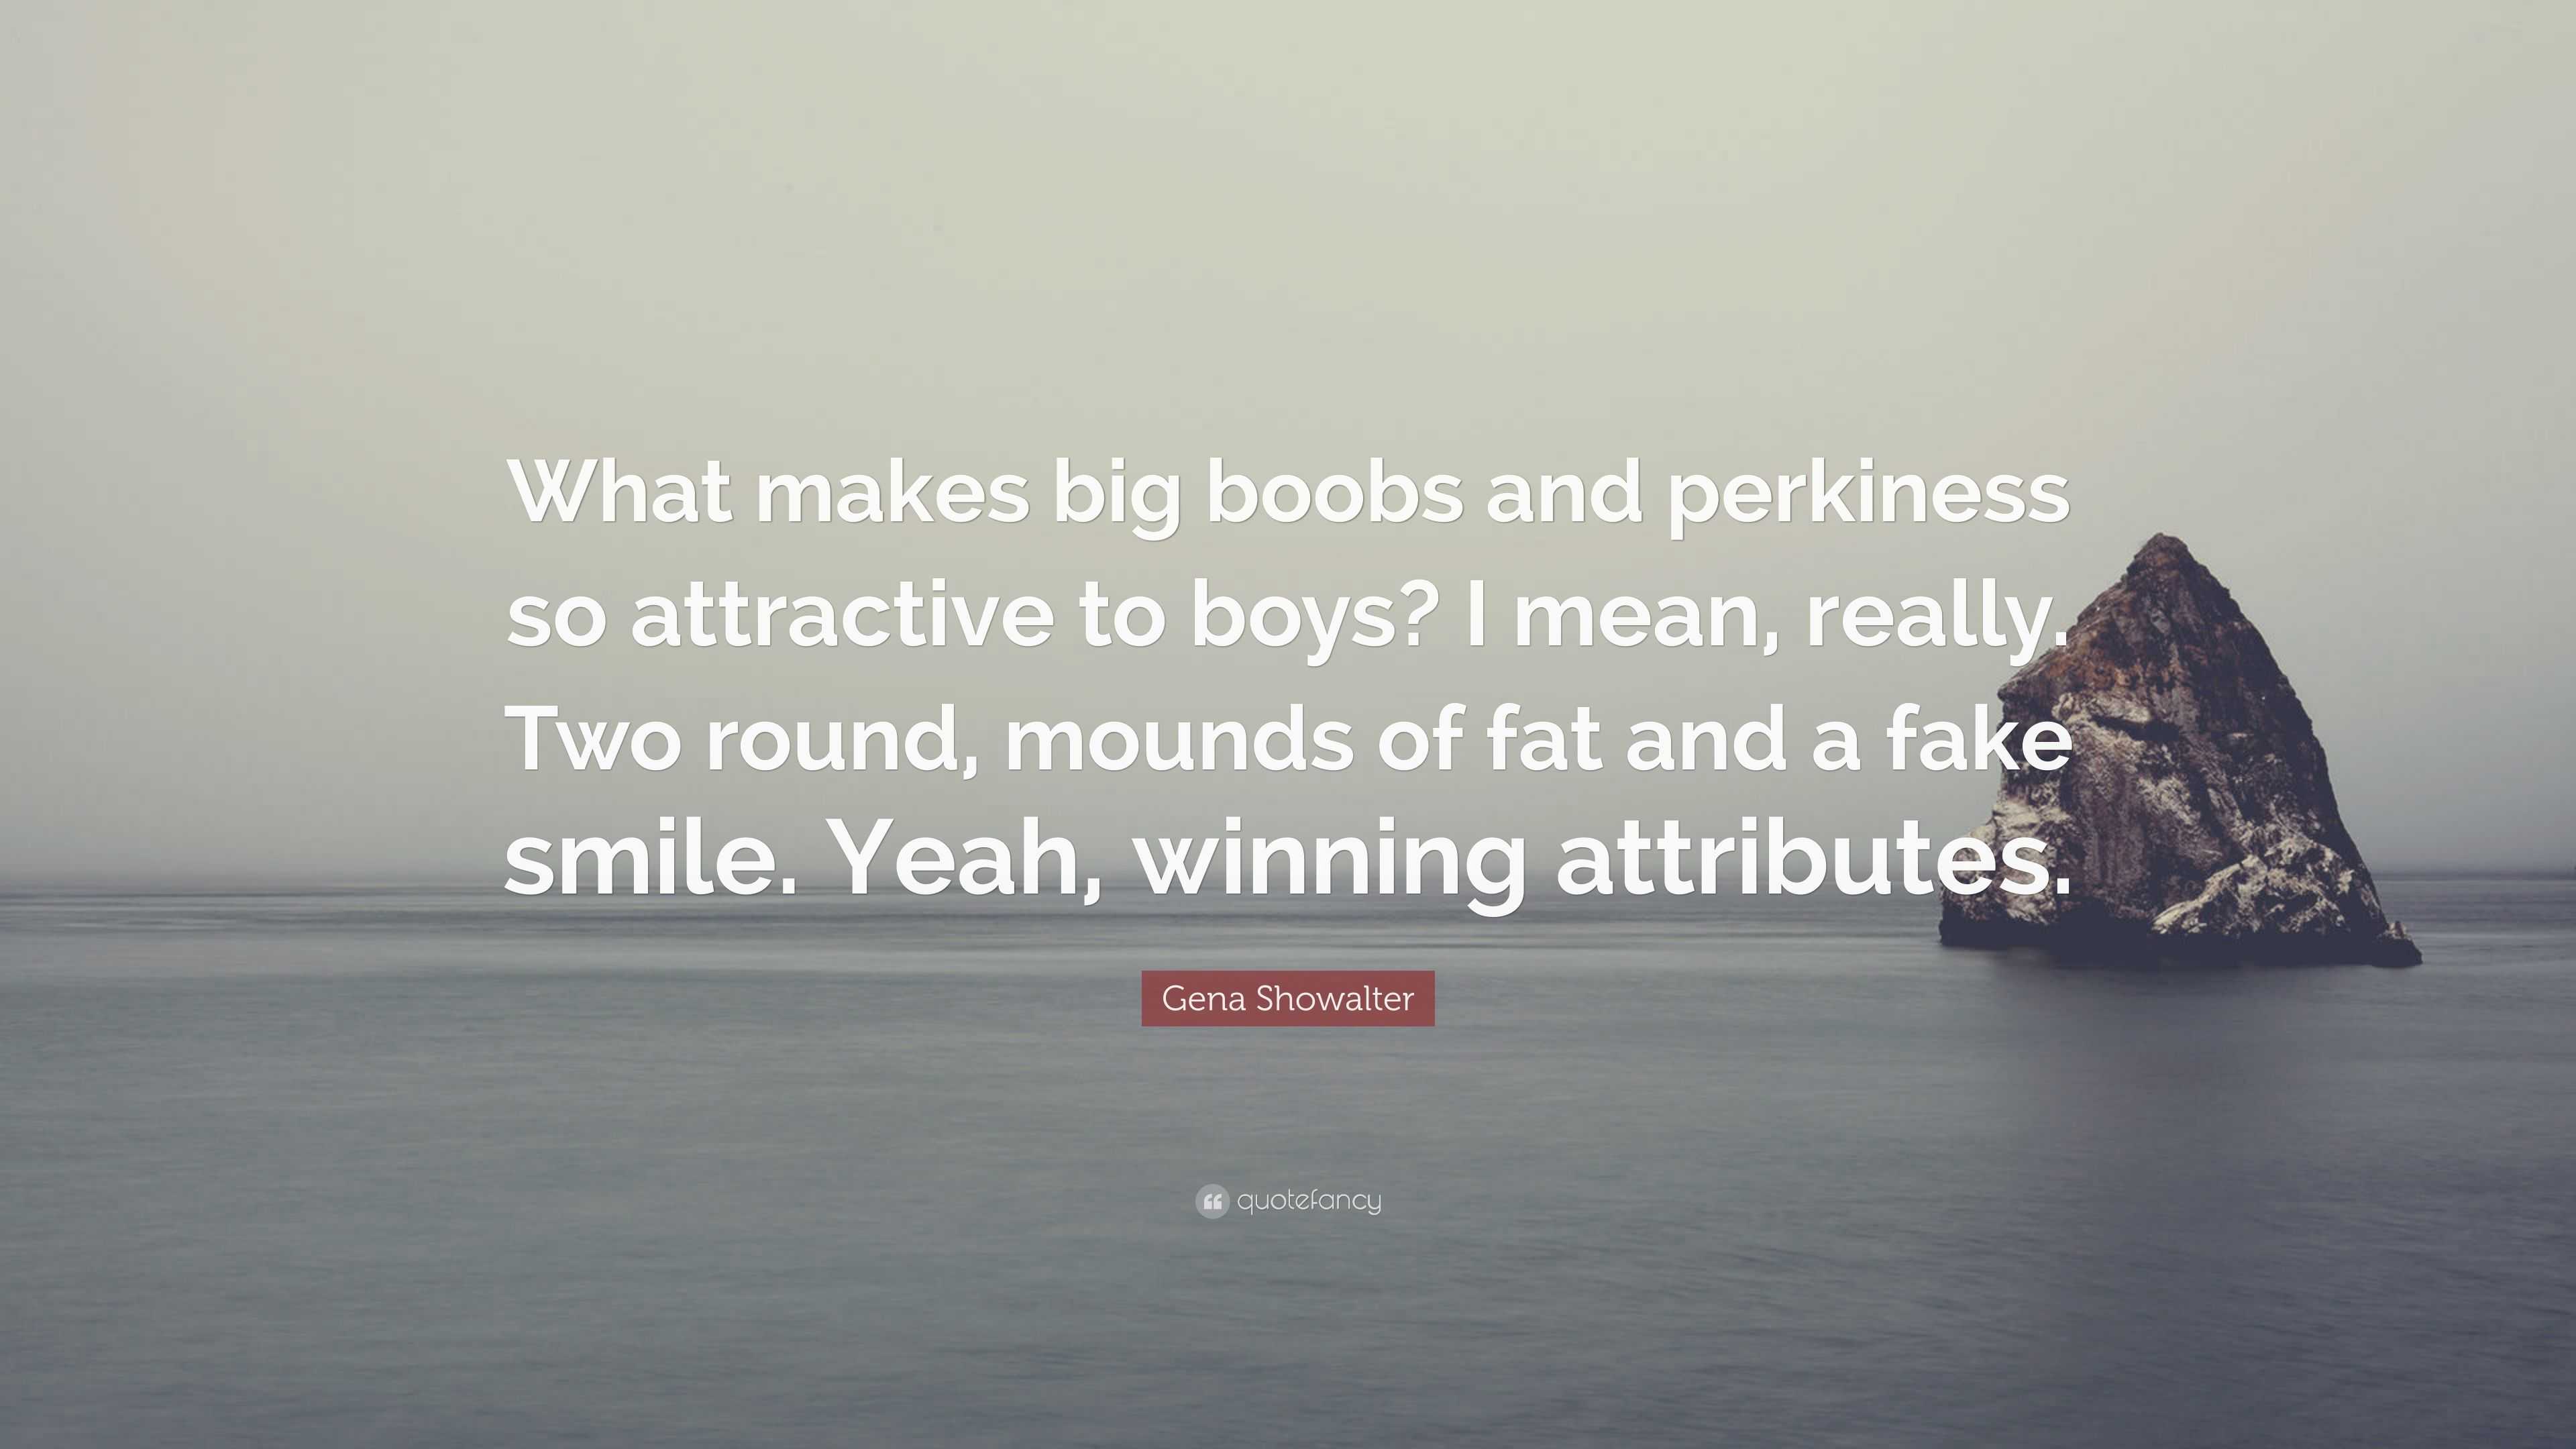 Gena Showalter Quote: “What makes big boobs and perkiness so attractive to  boys? I mean, really. Two round, mounds of fat and a fake smile. Yea”